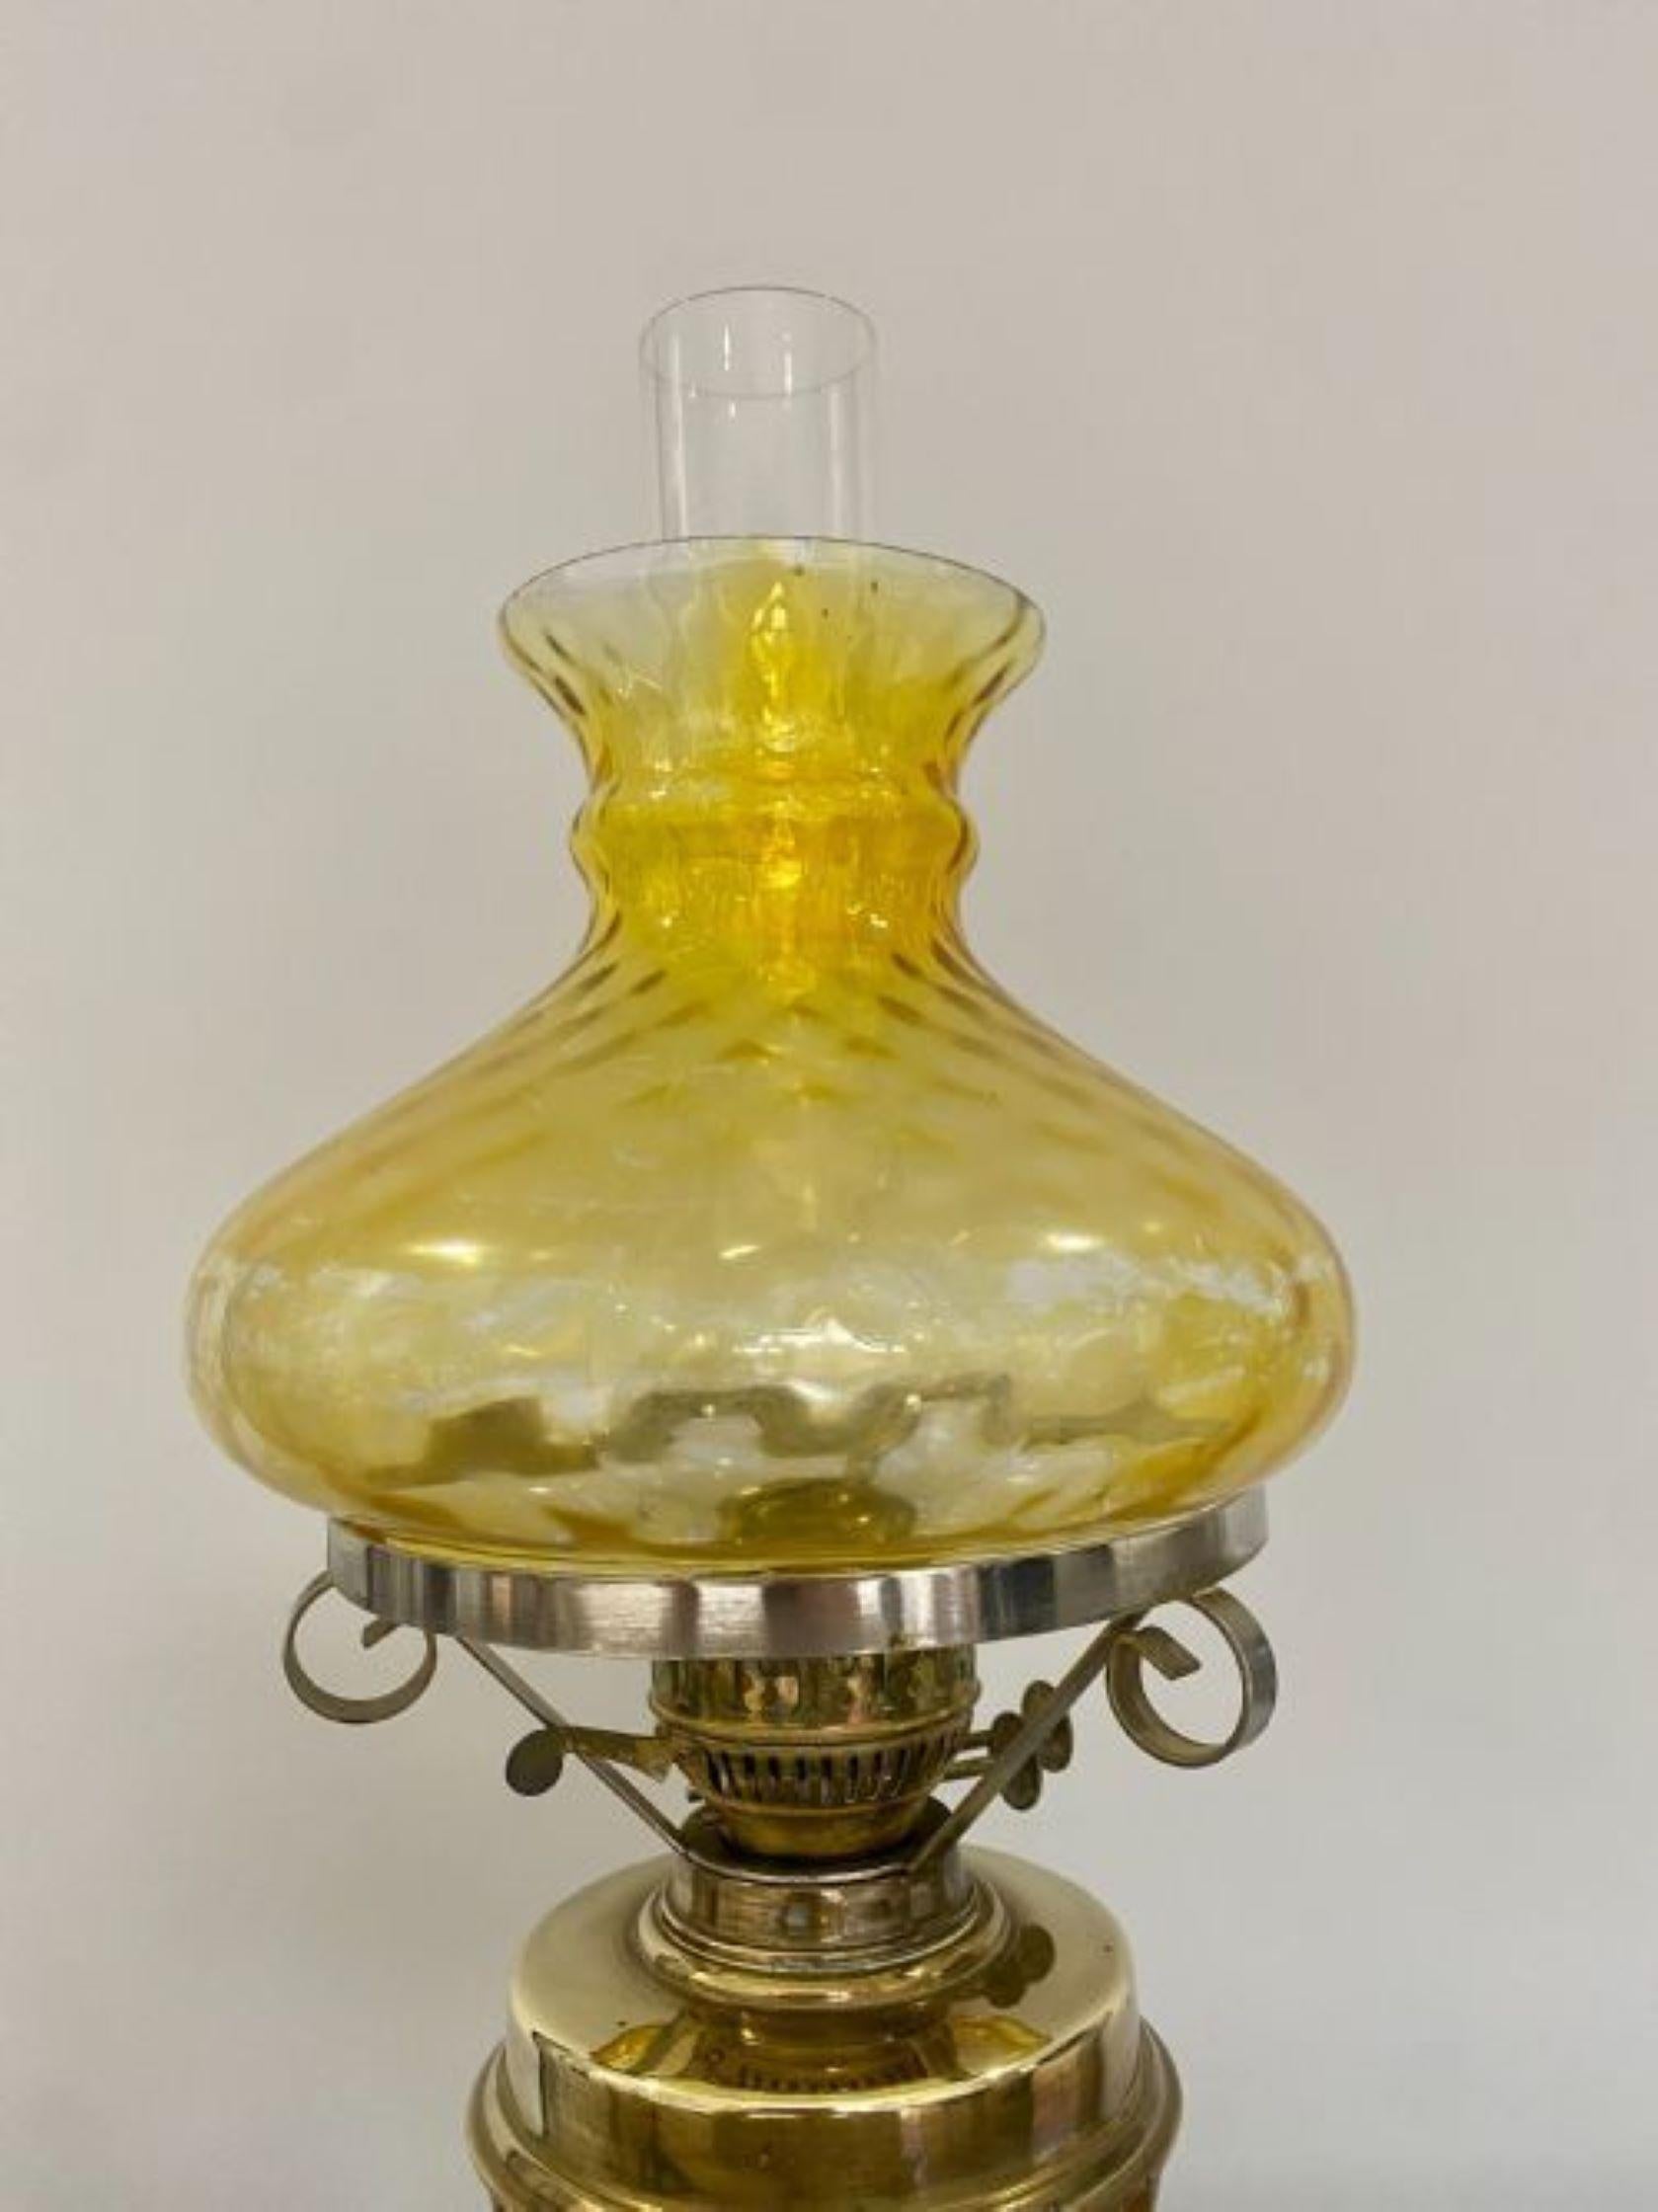 Antique Edwardian brass oil lamp having the original glass shade, double brass burner, brass front supported by a brass column raised on a brass circular stepped base